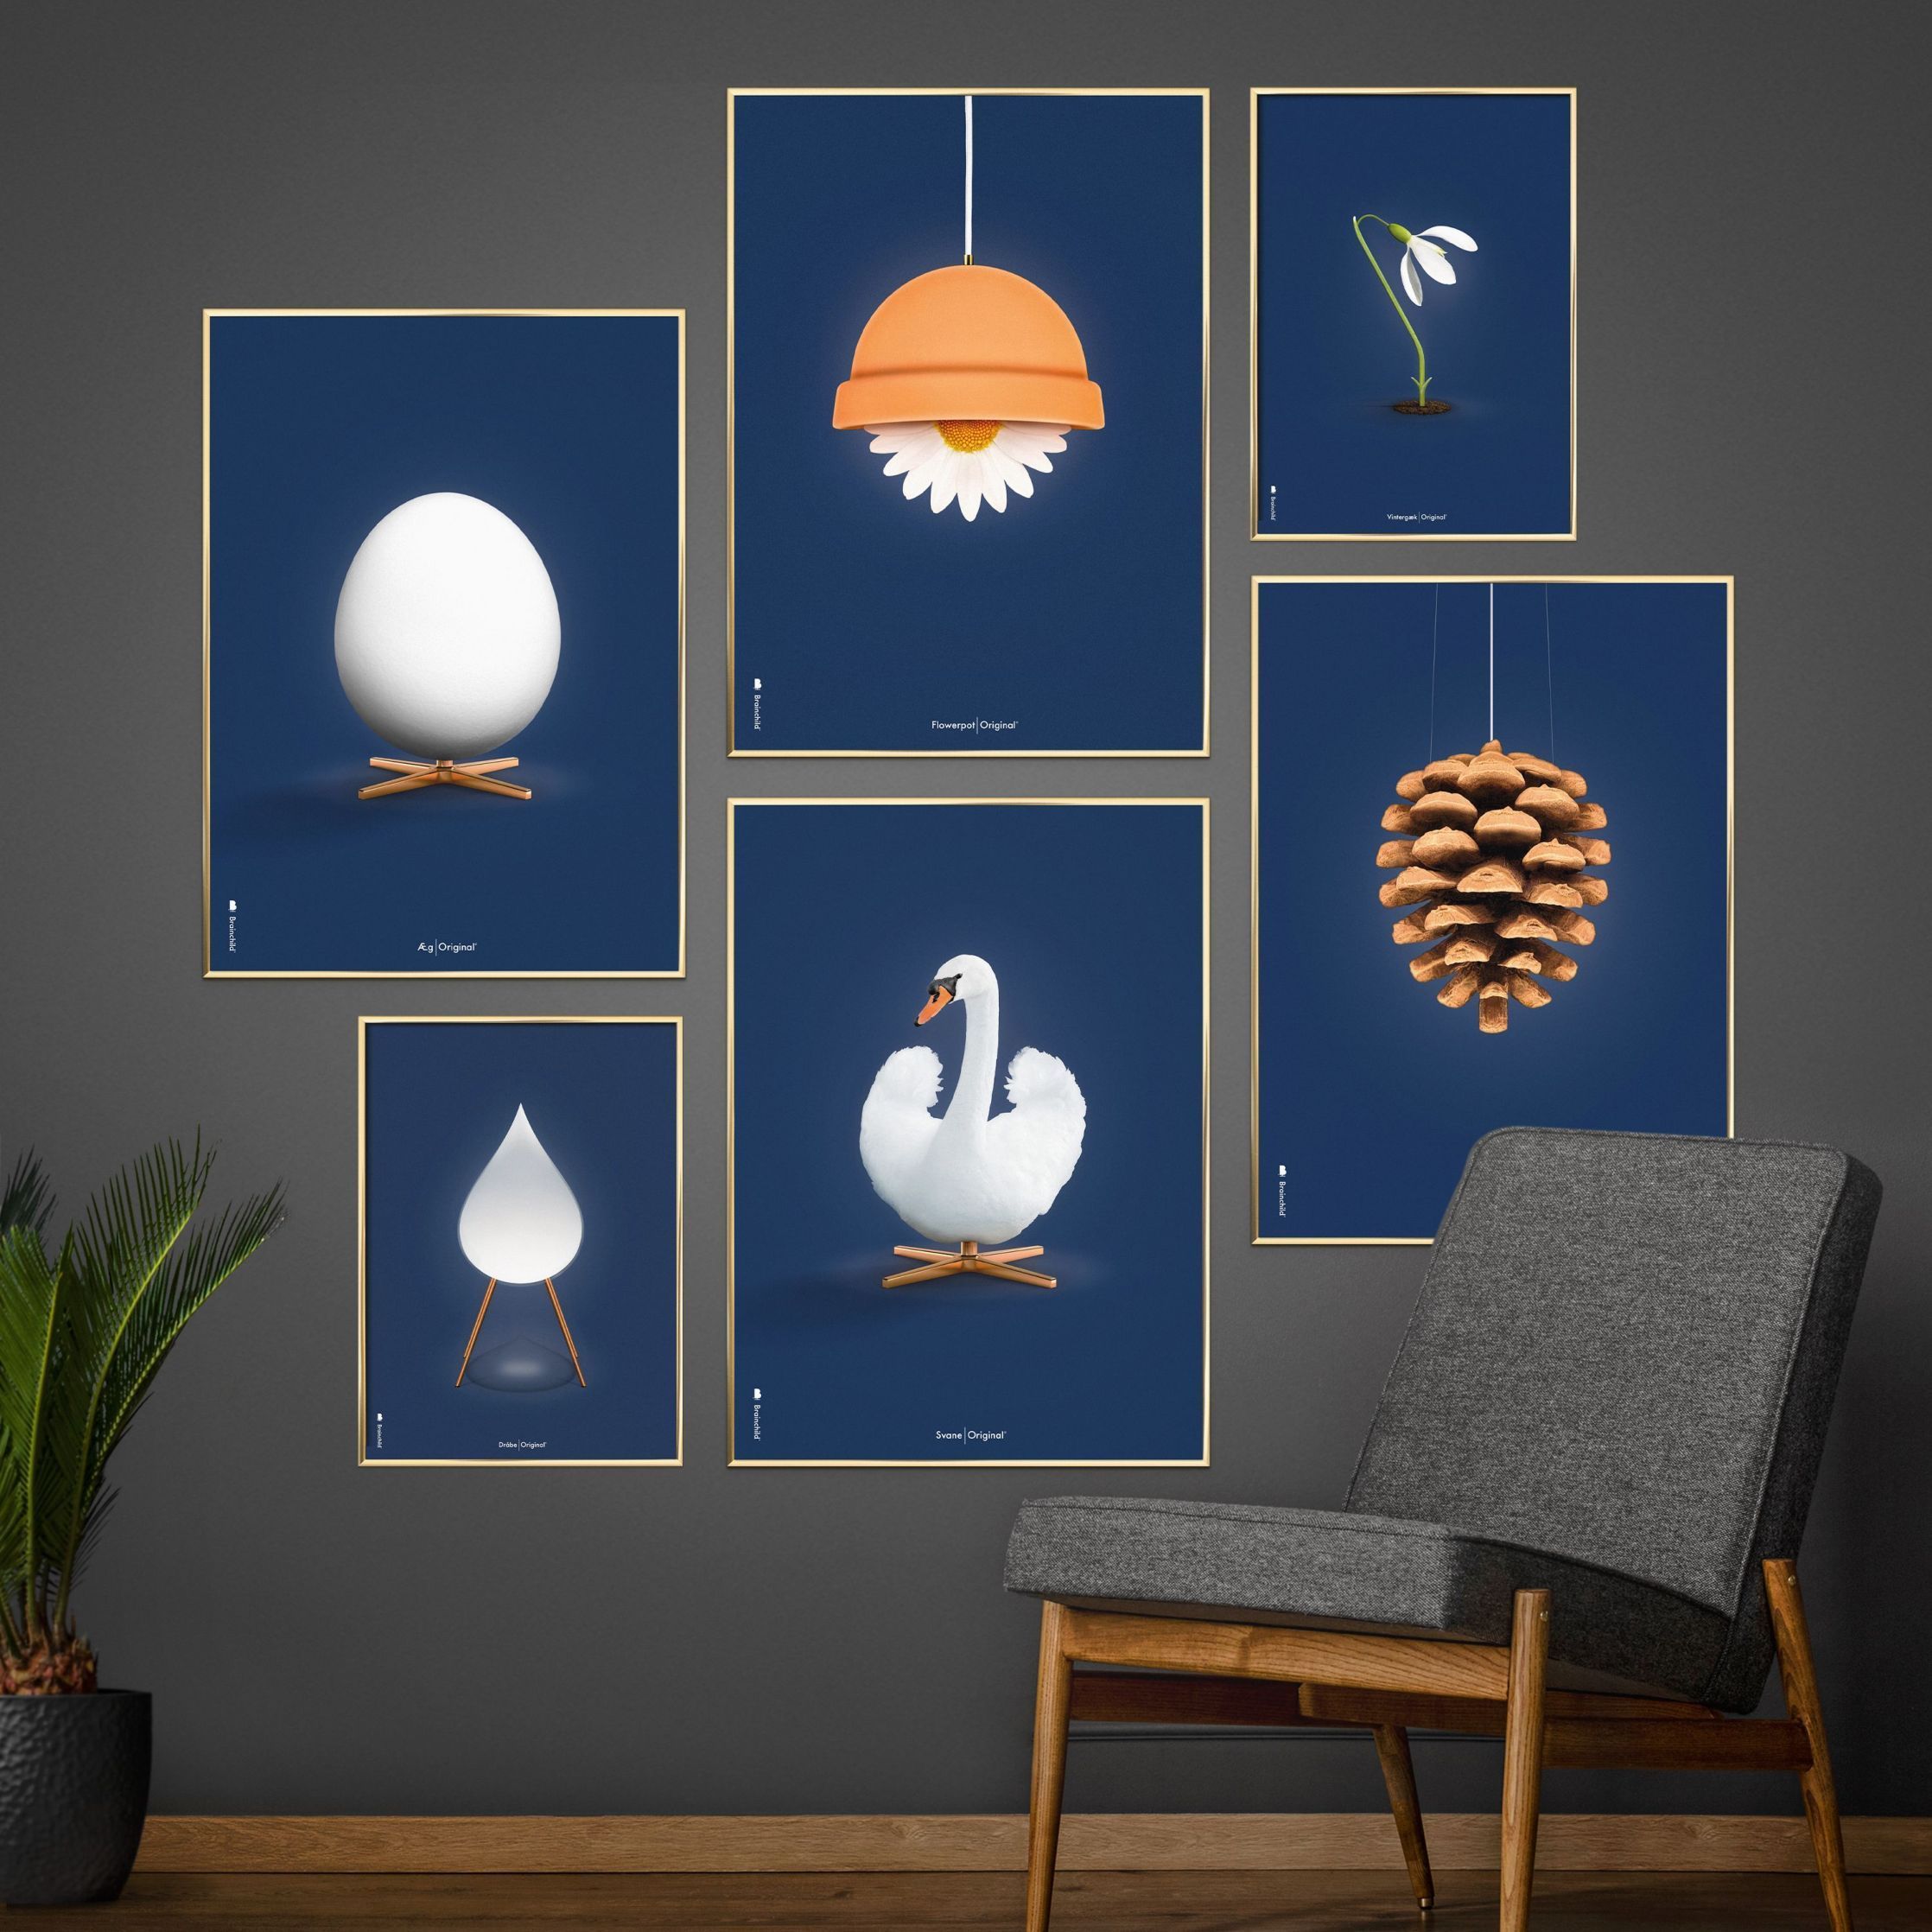 Brainchild Pine Cone Classic Poster, Frame Made Of Light Wood A5, Dark Blue Background